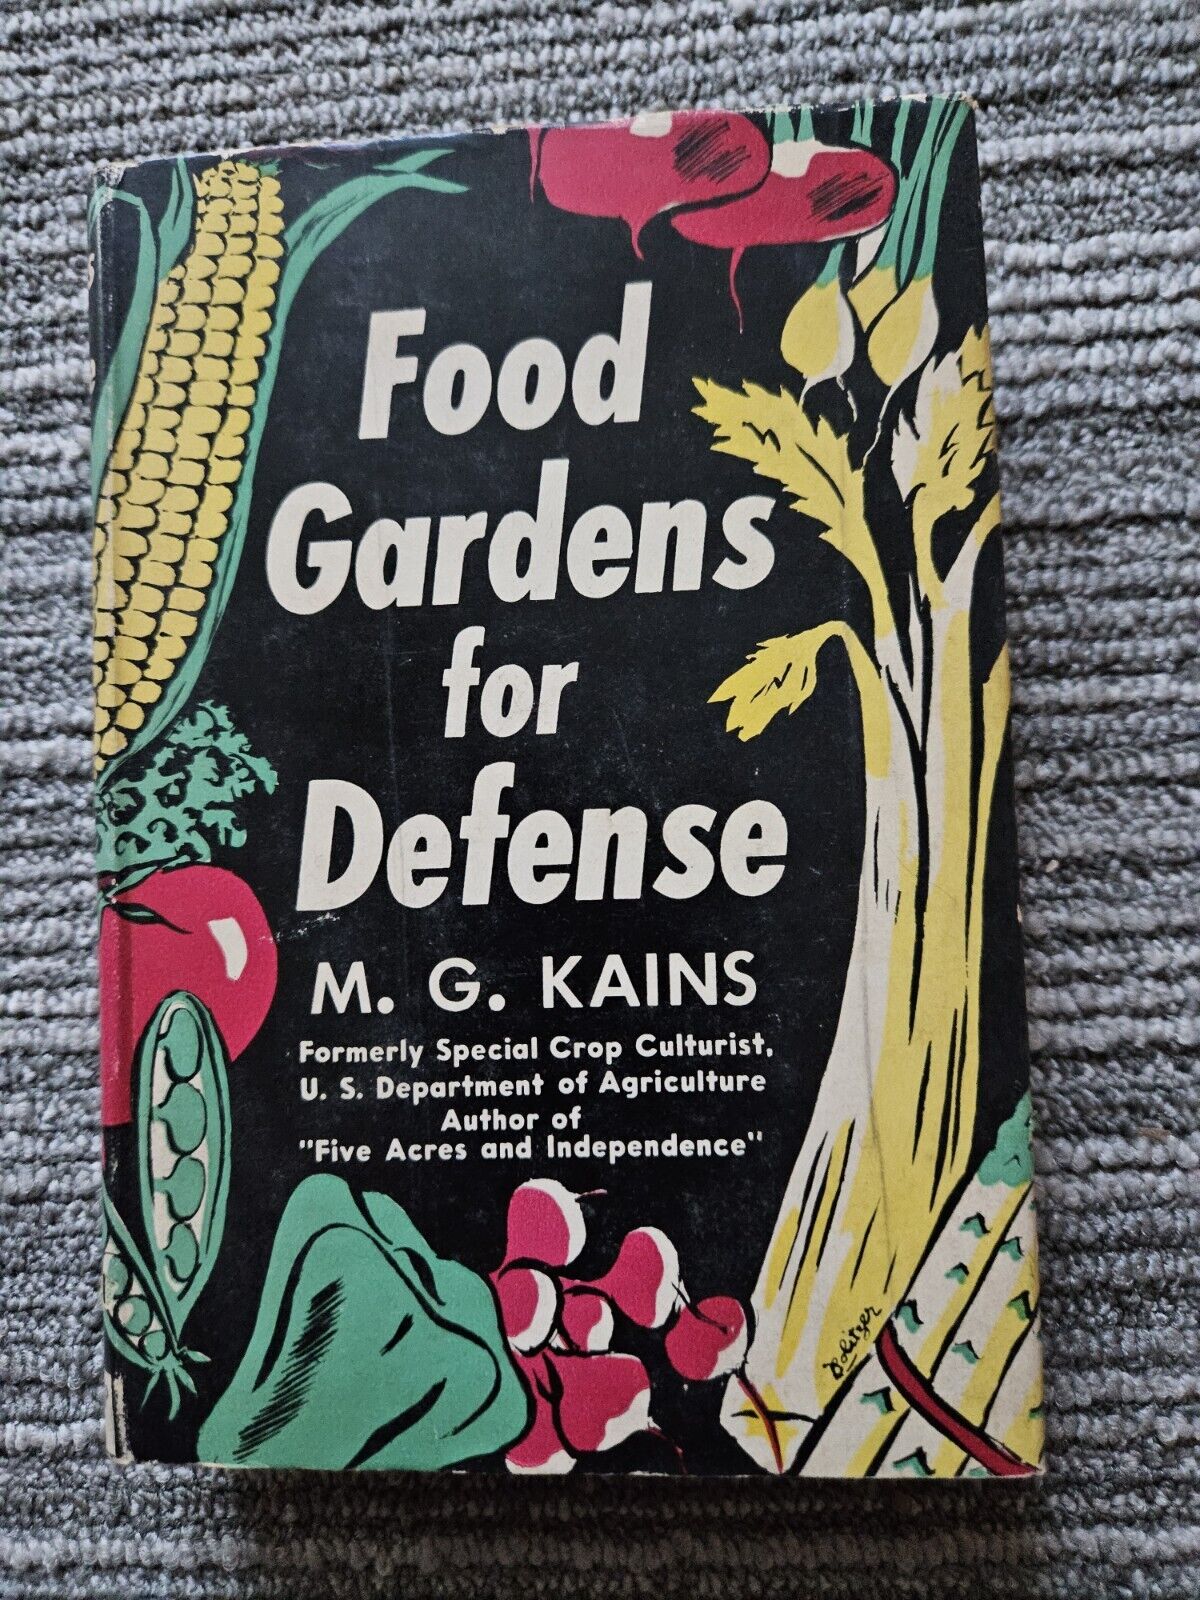 Food Gardens For Defense,  by M. G. Kains, hardcover